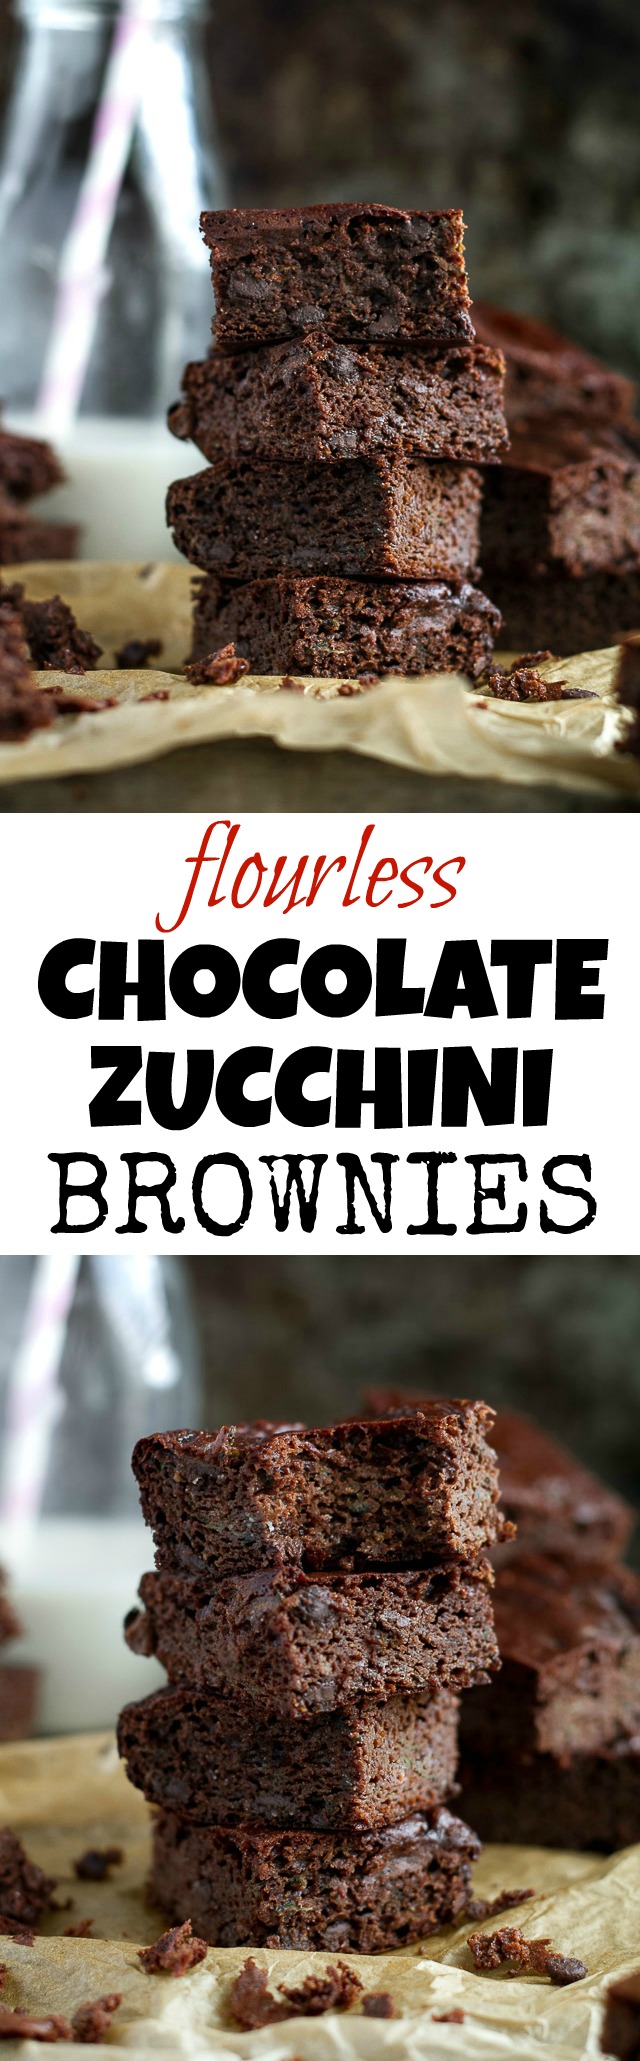 These flourless double chocolate zucchini brownies are gluten-free, grain-free, oil-free, dairy-free, and refined sugar-free, but so tender and chocoately that you’d never be able to tell they're healthy! | runningwithspoons.com